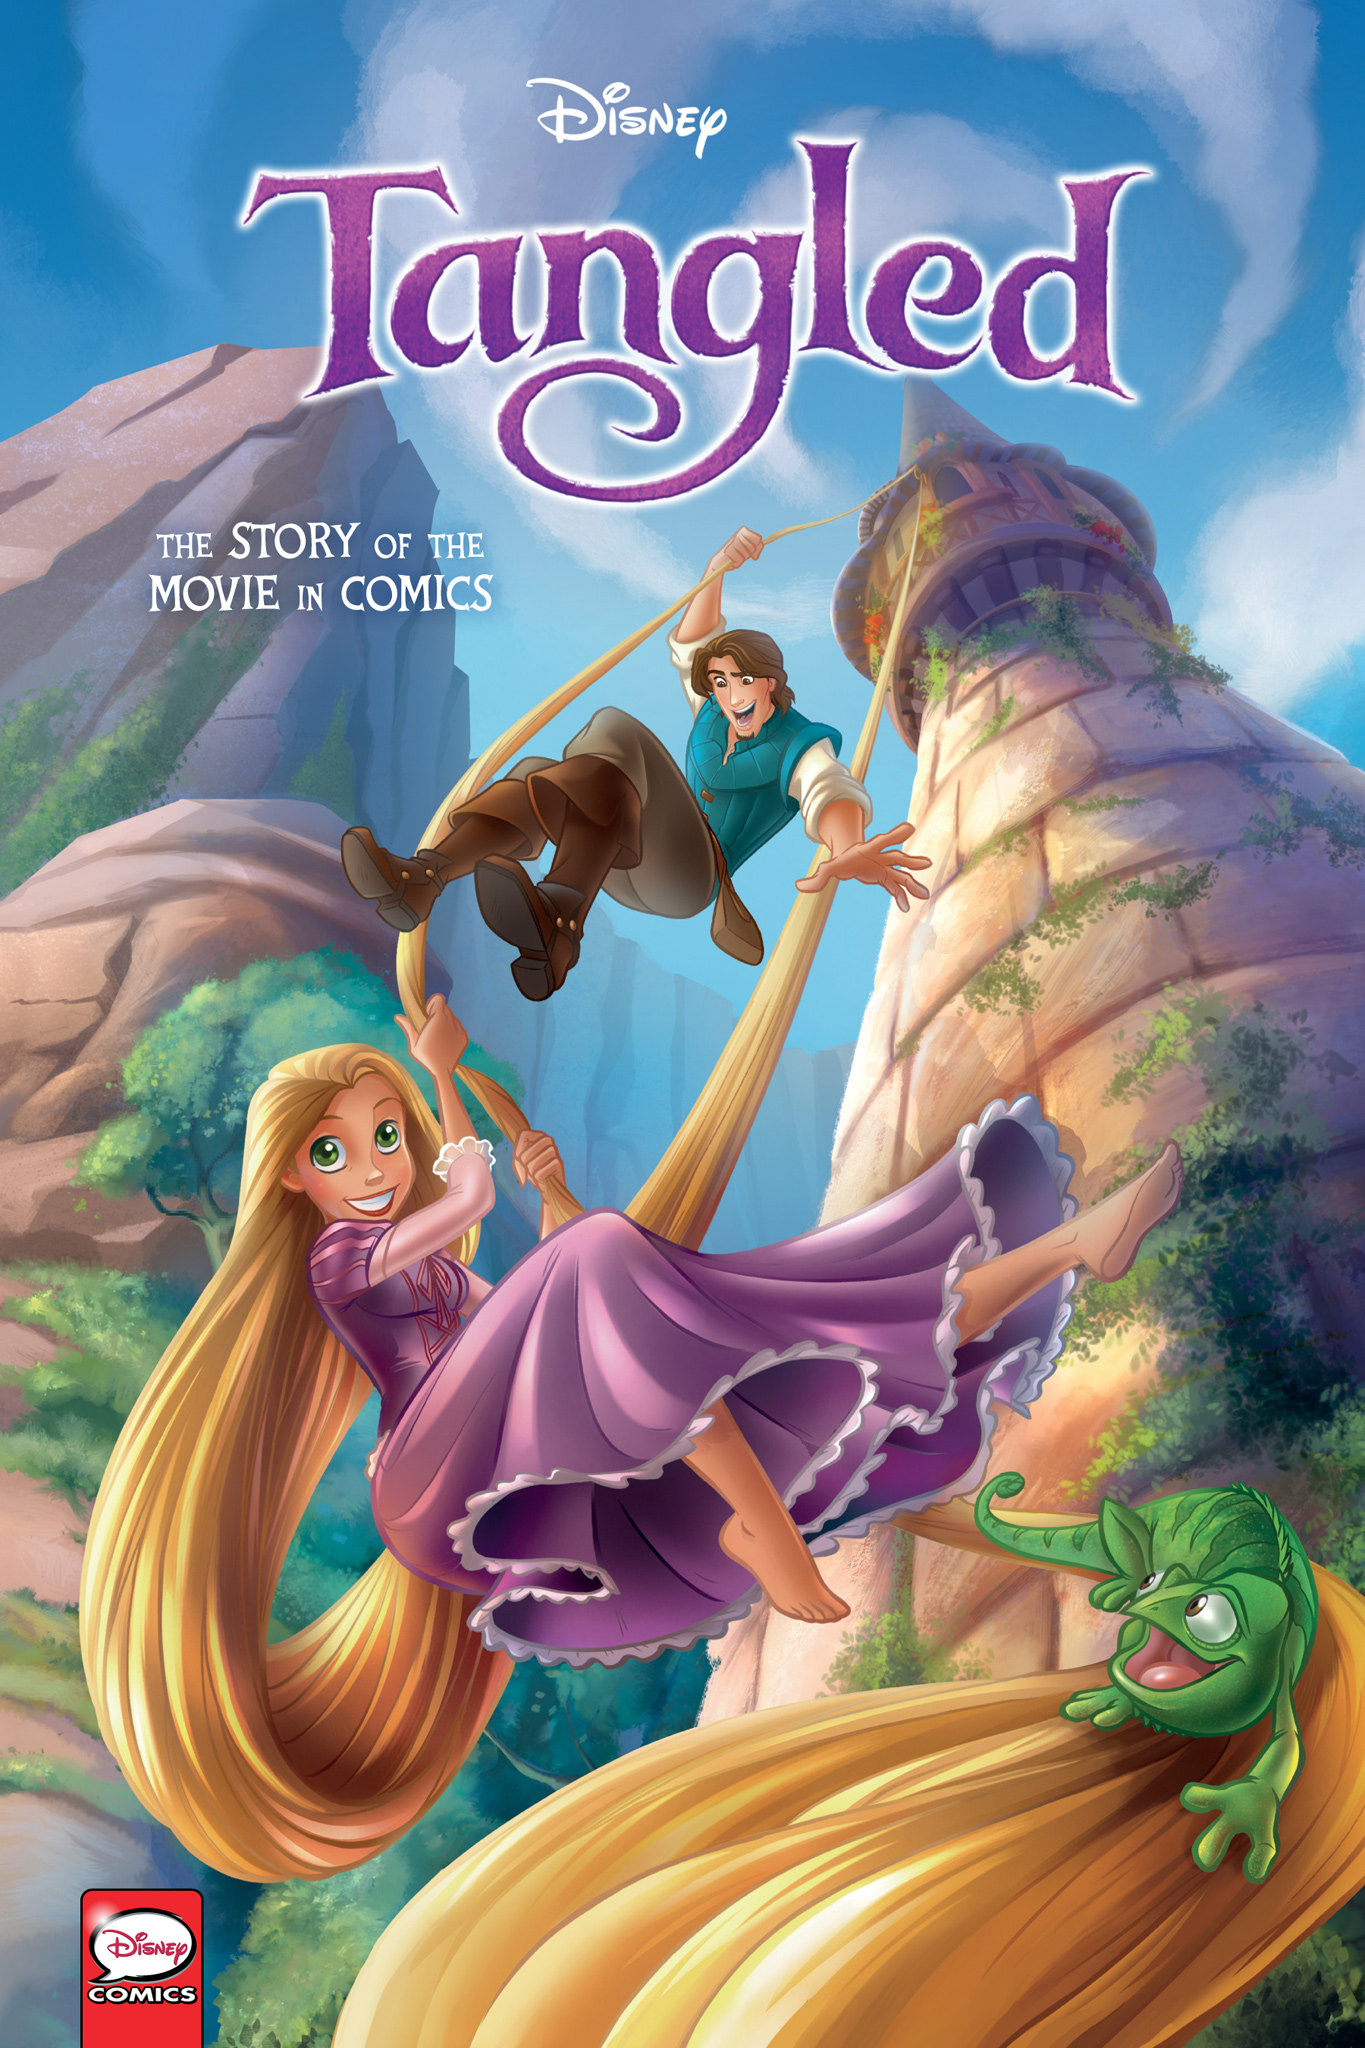 Disney Tangled: The Story of the Movie in Comics (Disney Princesses)